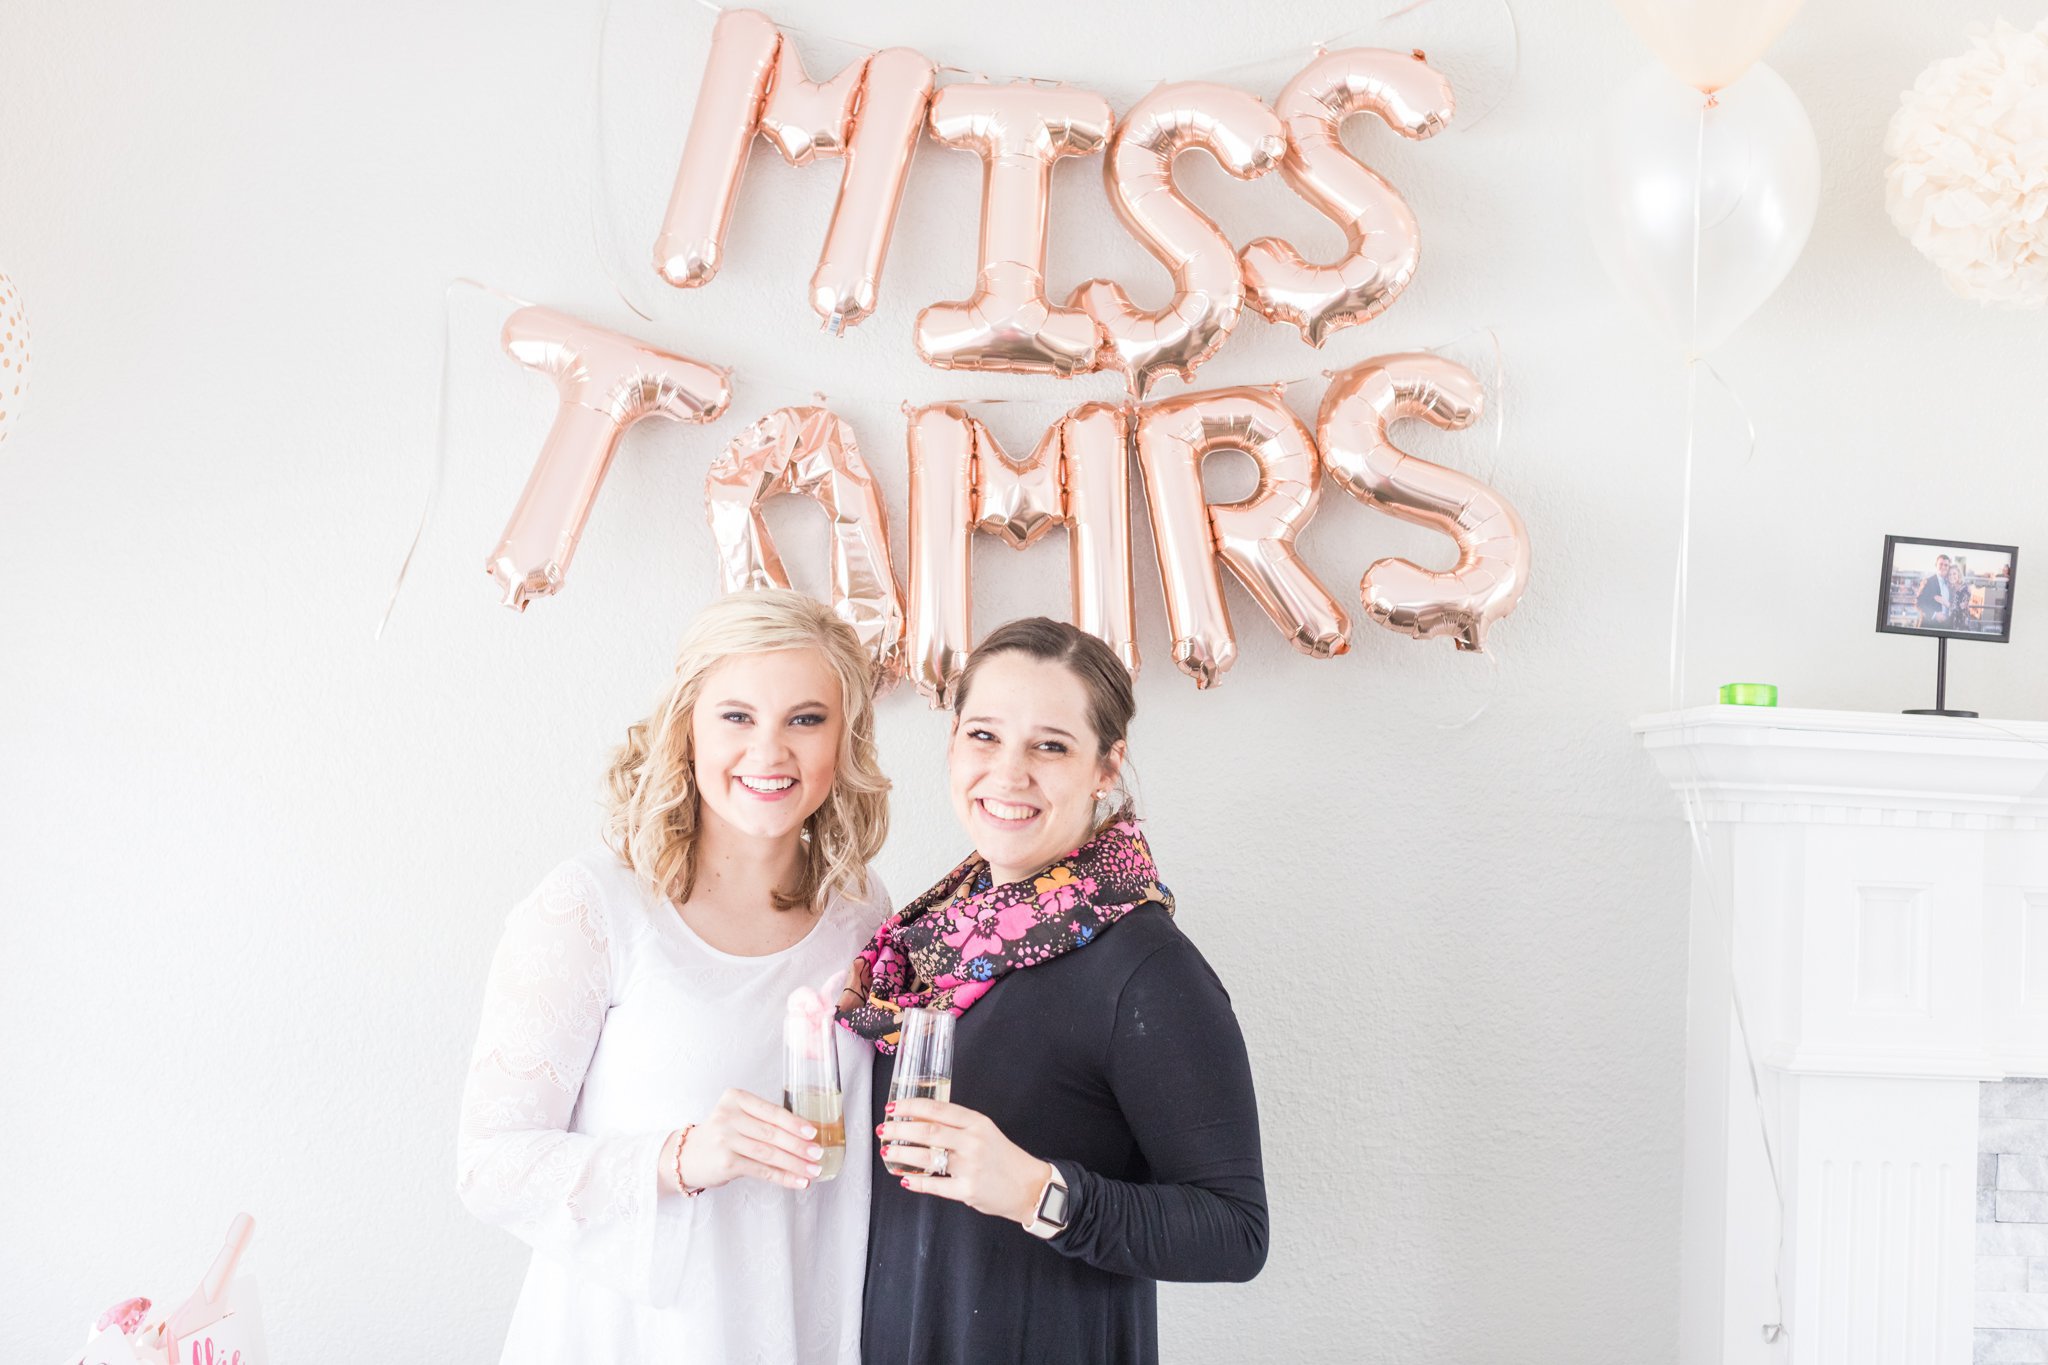 A brunch and blush themed bridal shower in Dallas Texas